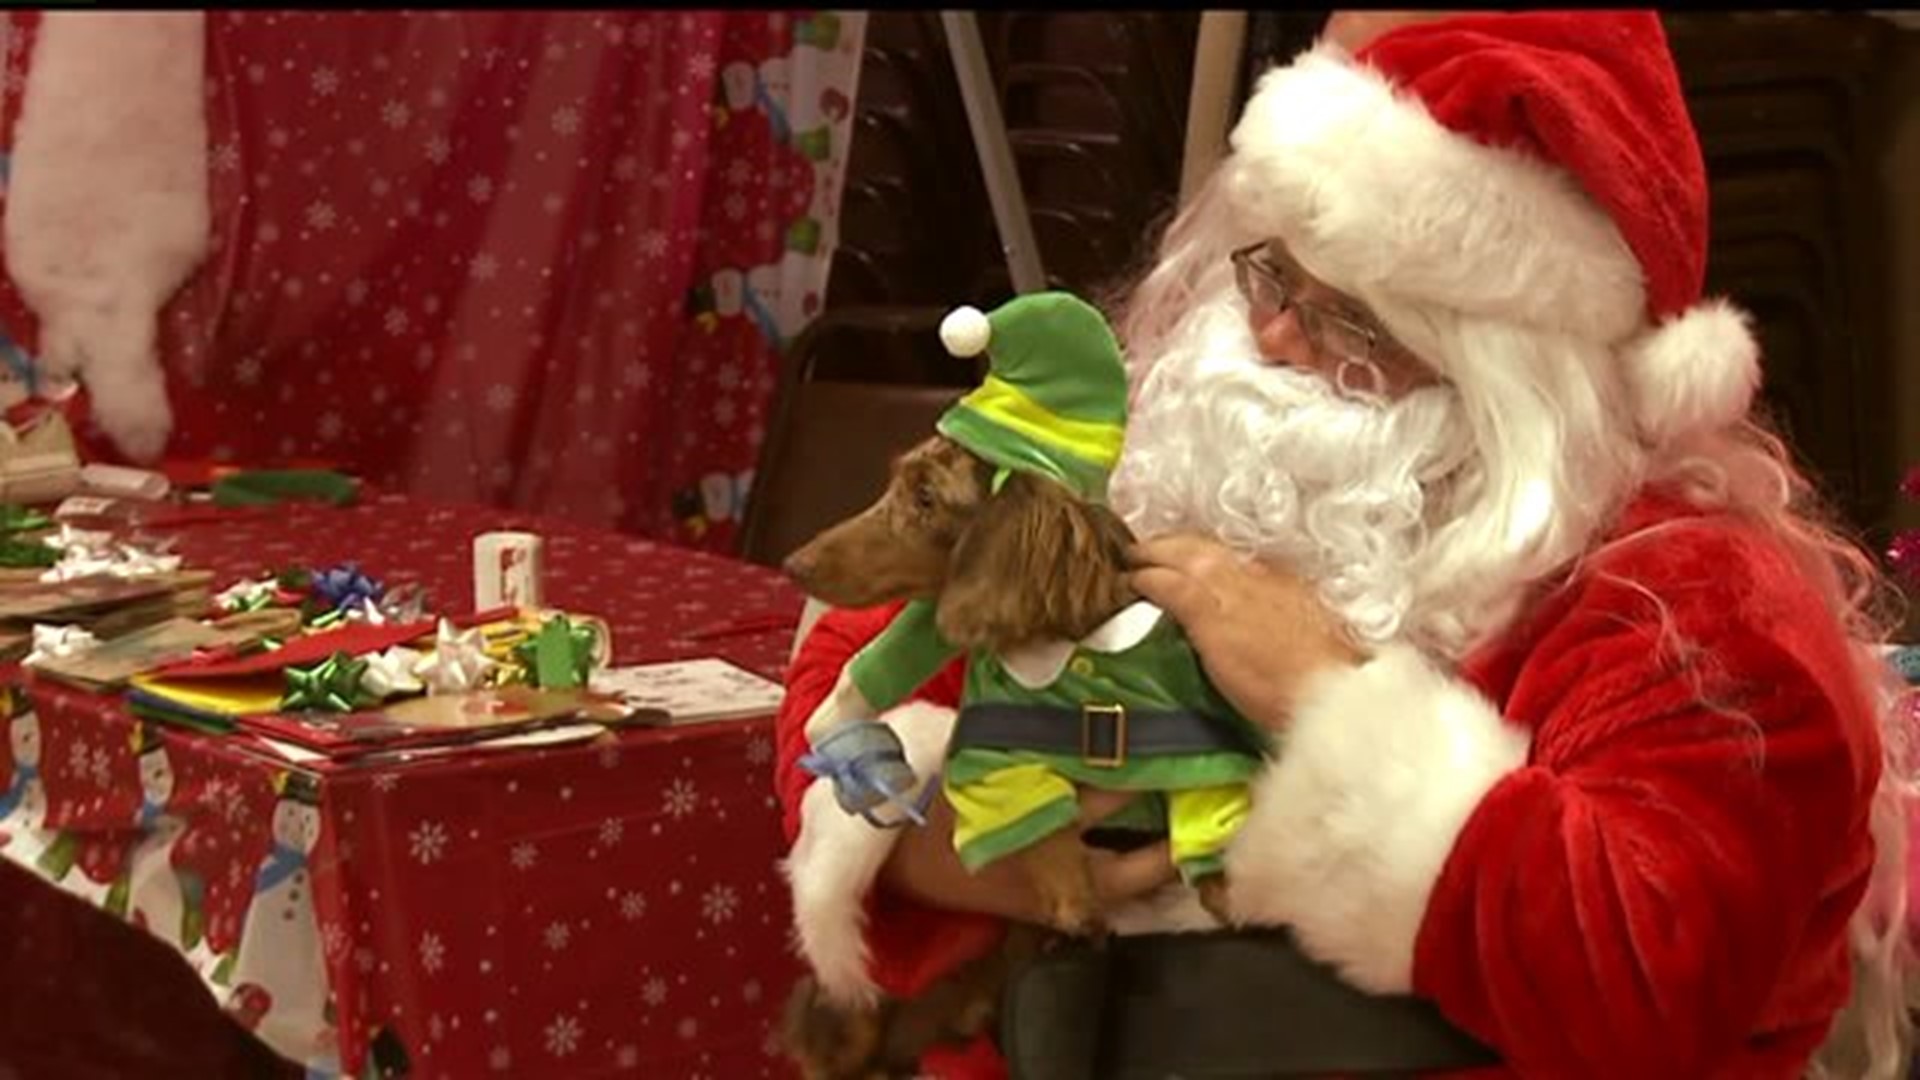 Annual bazaar held with furry friends